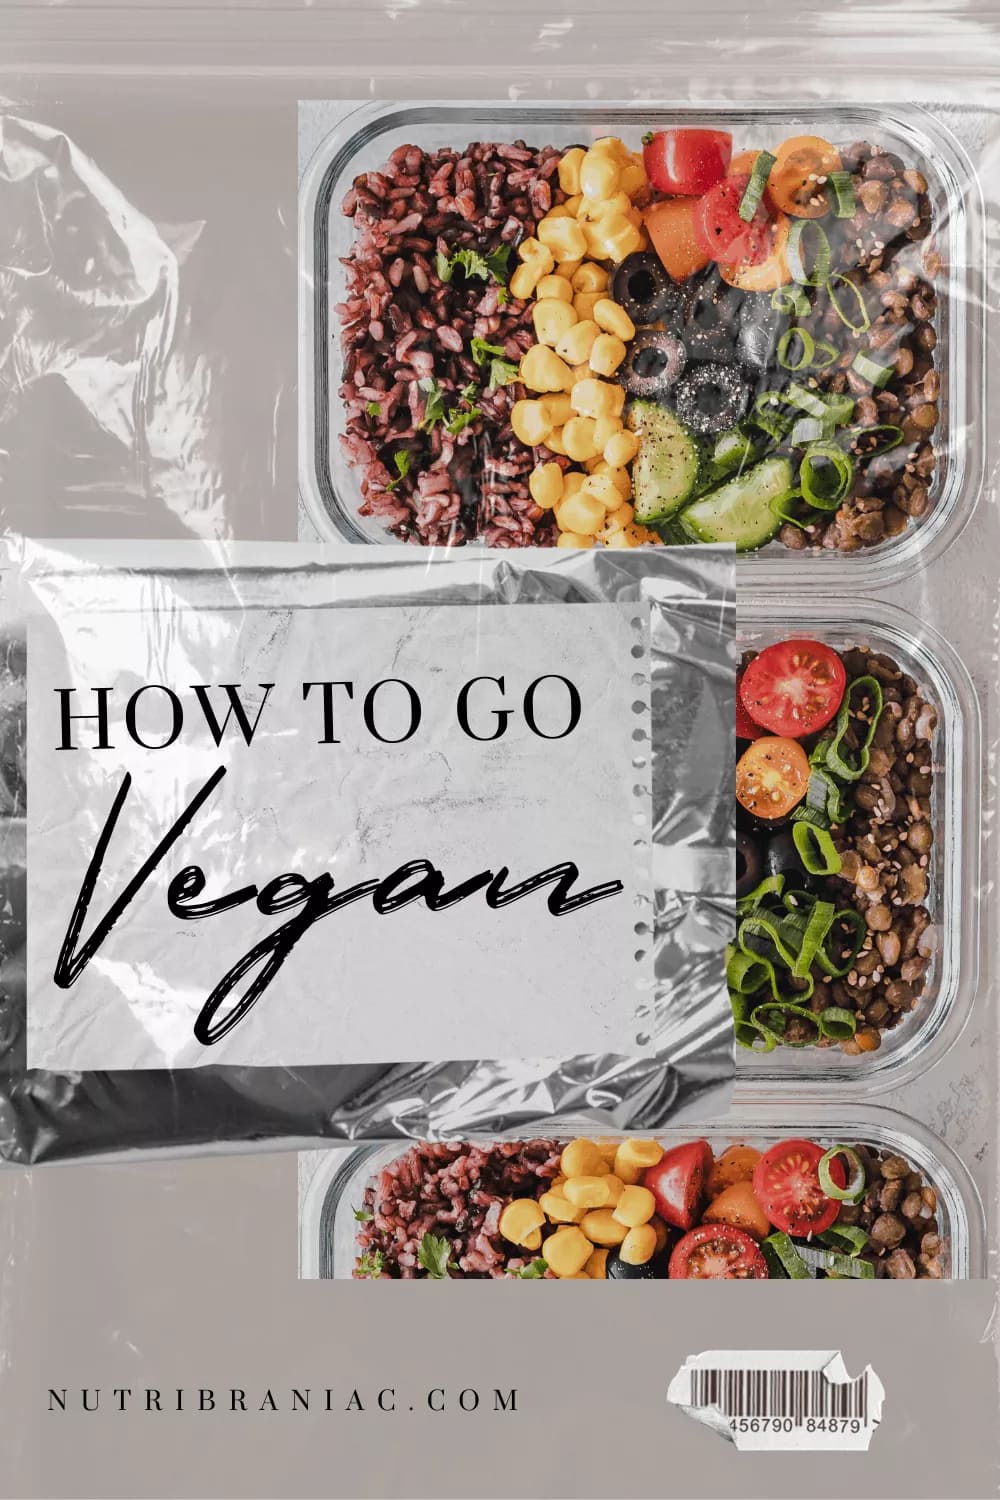 image of plant-based meal prep, 3 glass containers of quinoa salad, with text overlay, "How To Go Vegan"